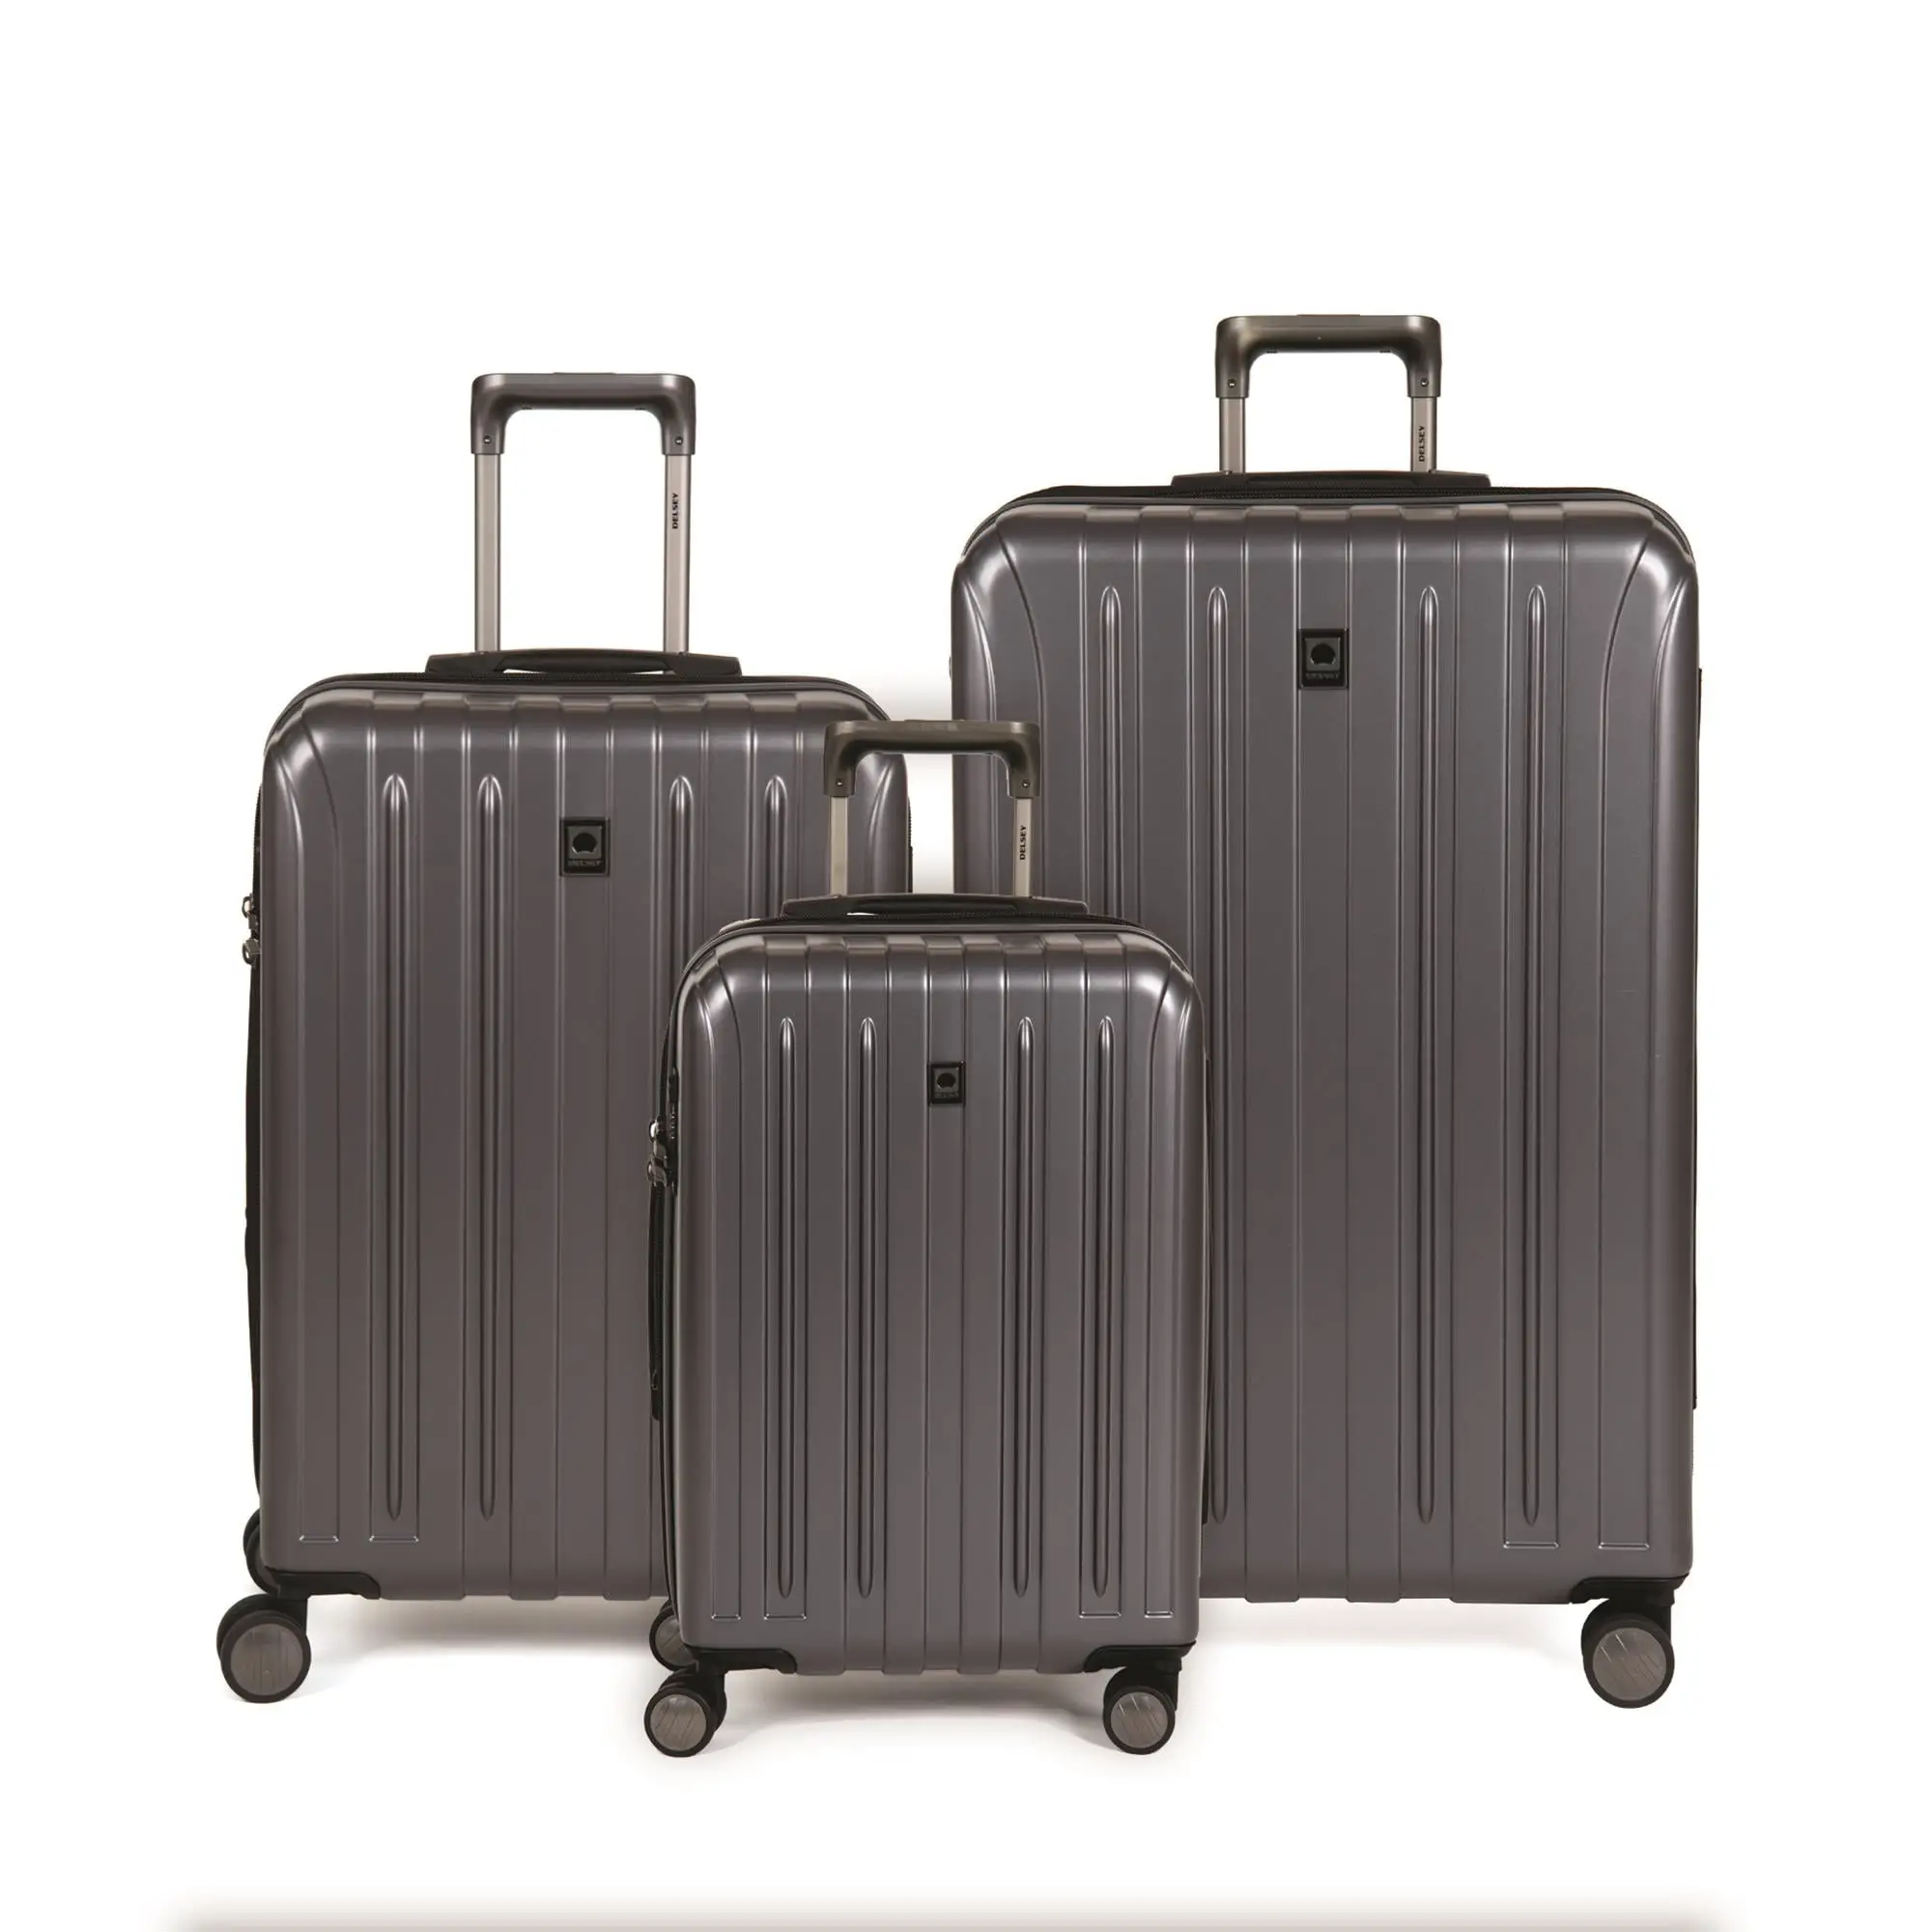 Delsey 3 Piece Luggage Set – A Match Made in Travel Heaven?